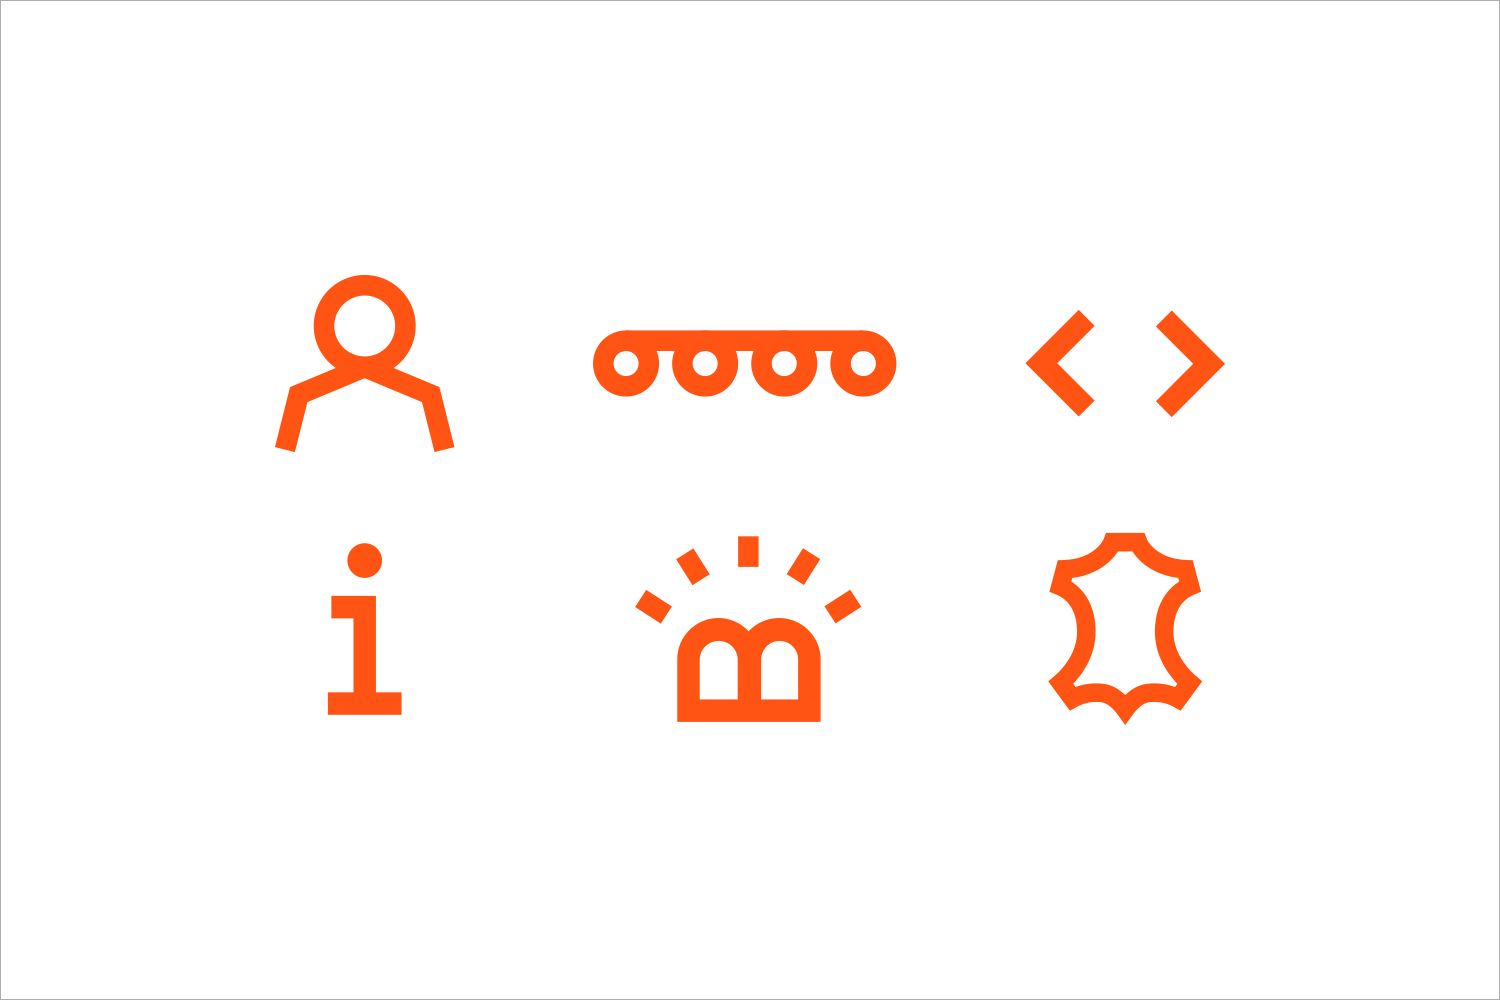 Icons for Swiss binding specialists Bubu by graphic design studio Bob Design